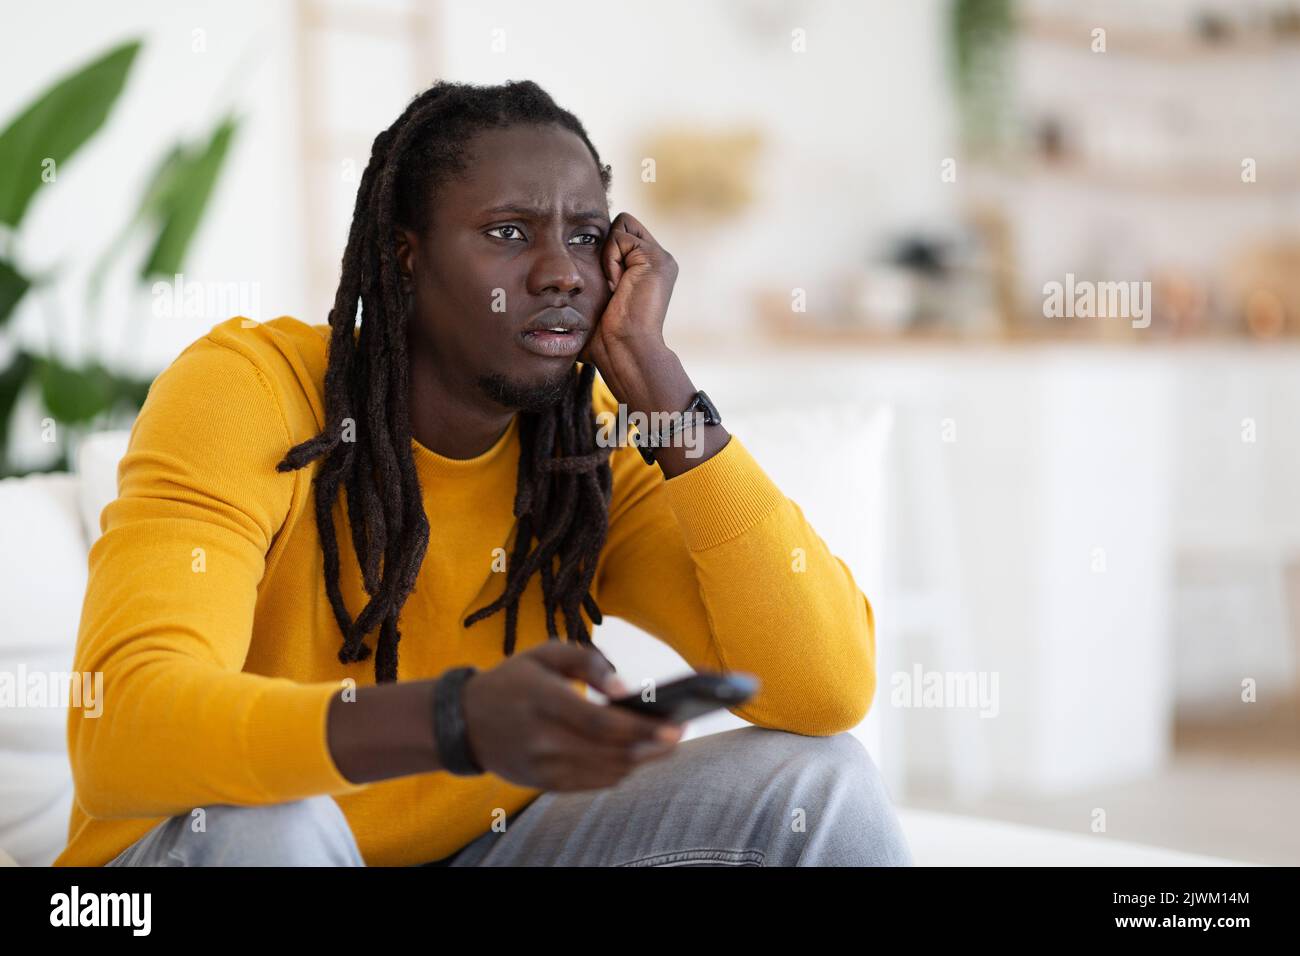 Boring Program. Portrait Of Bored Young Black Guy Watching TV At Home Stock Photo